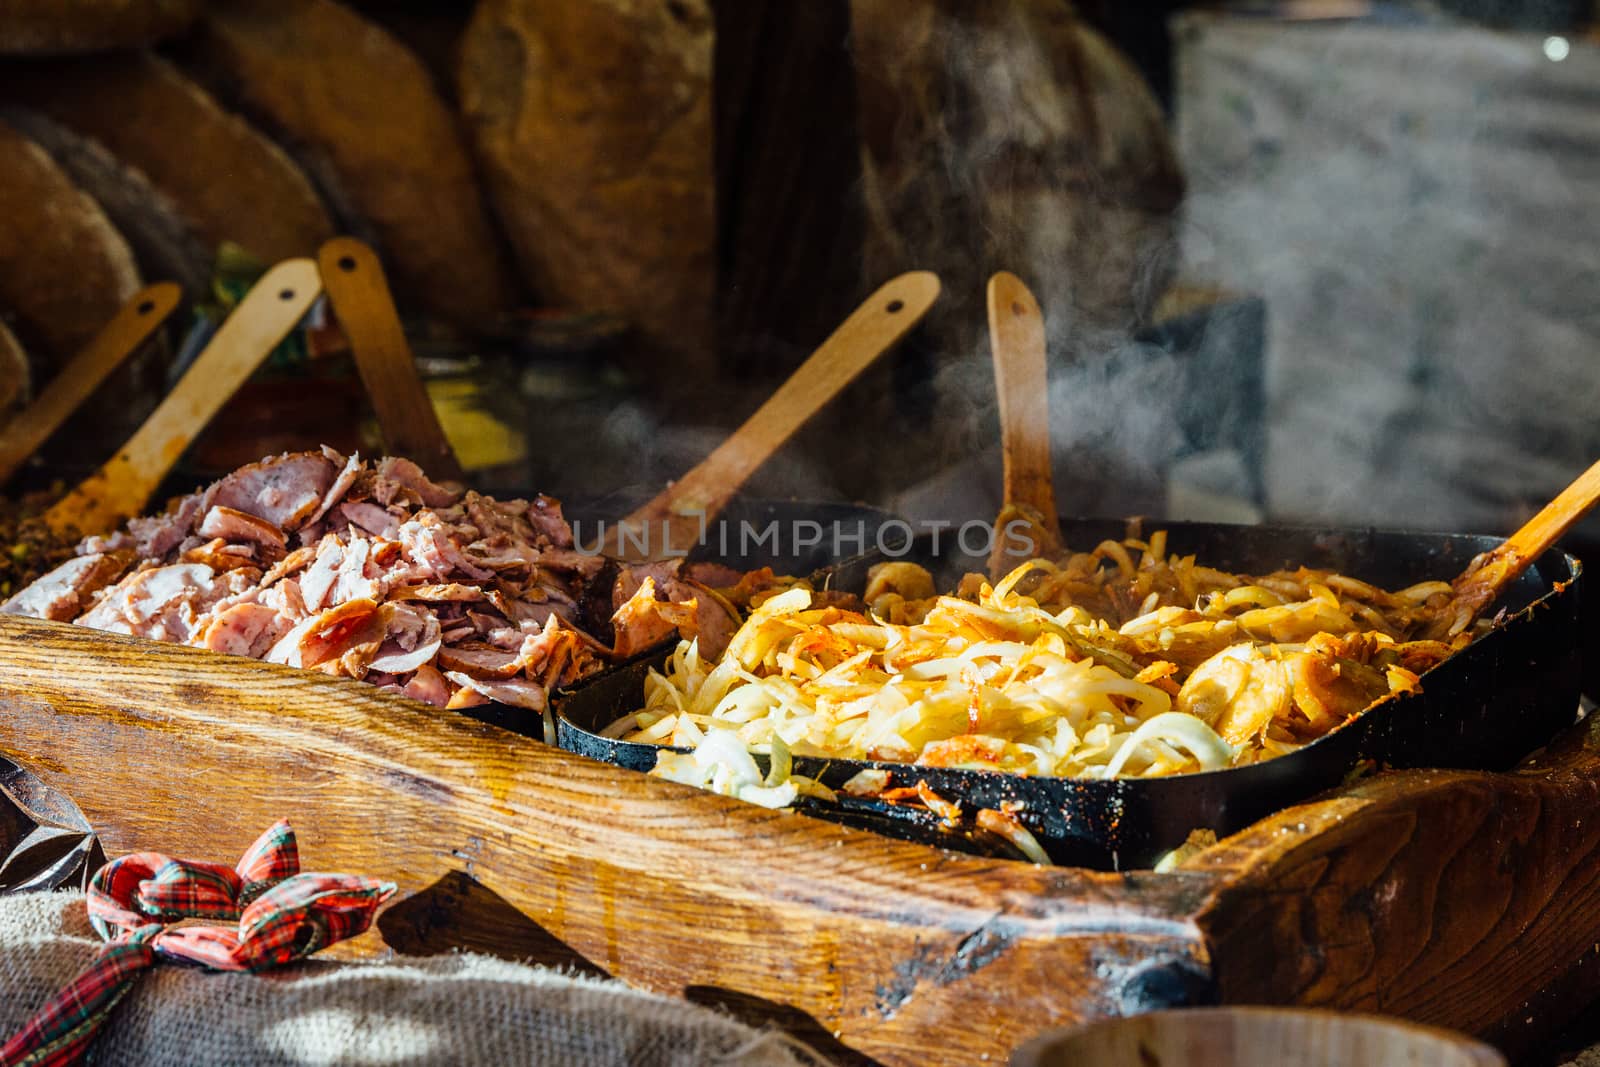 Krakow Christmas market stall serving traditional slices of bread with grilled meat, onions and sauce.